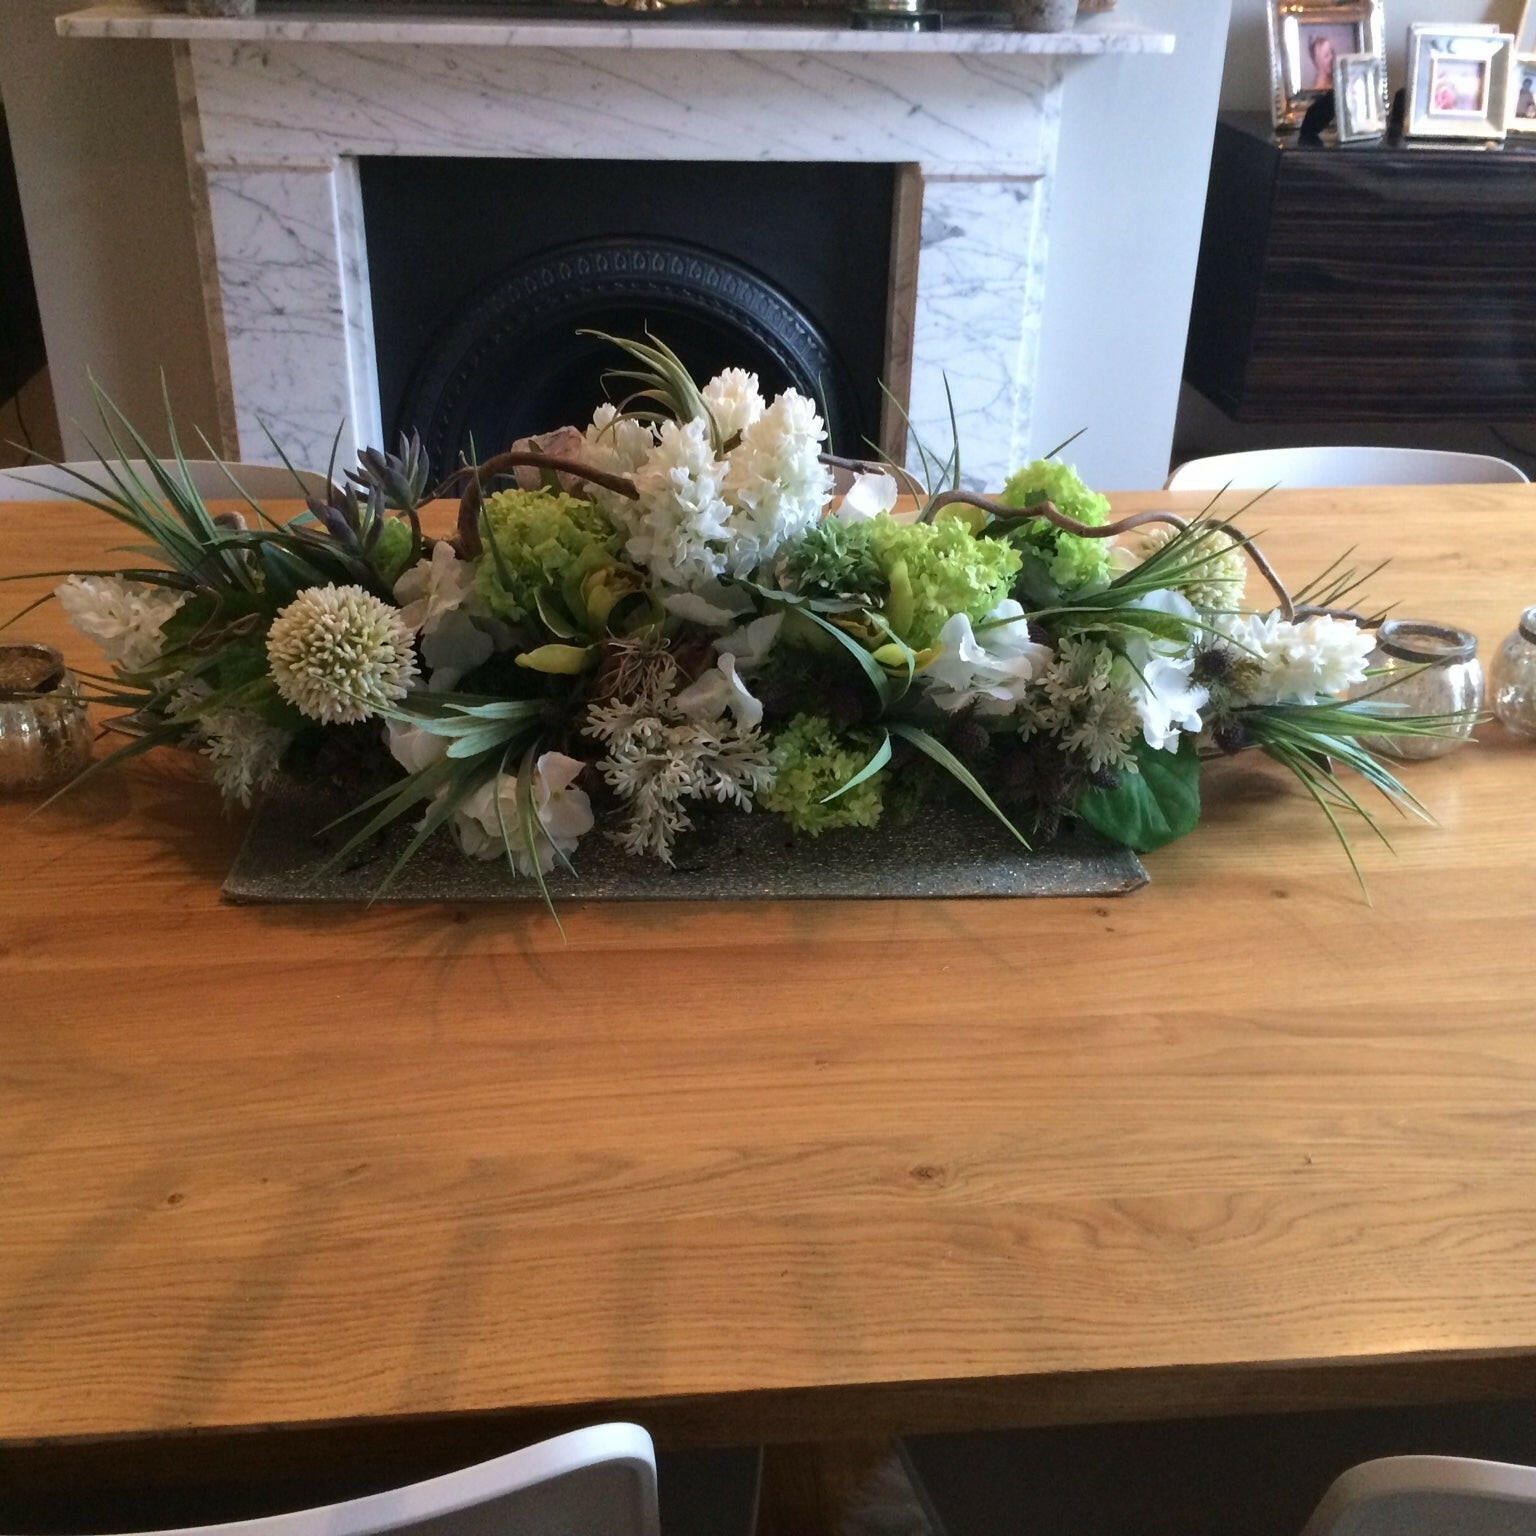 Showing a Bespoke artificial Silk flower arrangement, including the Vanilla Grass, sent in by one of our customers